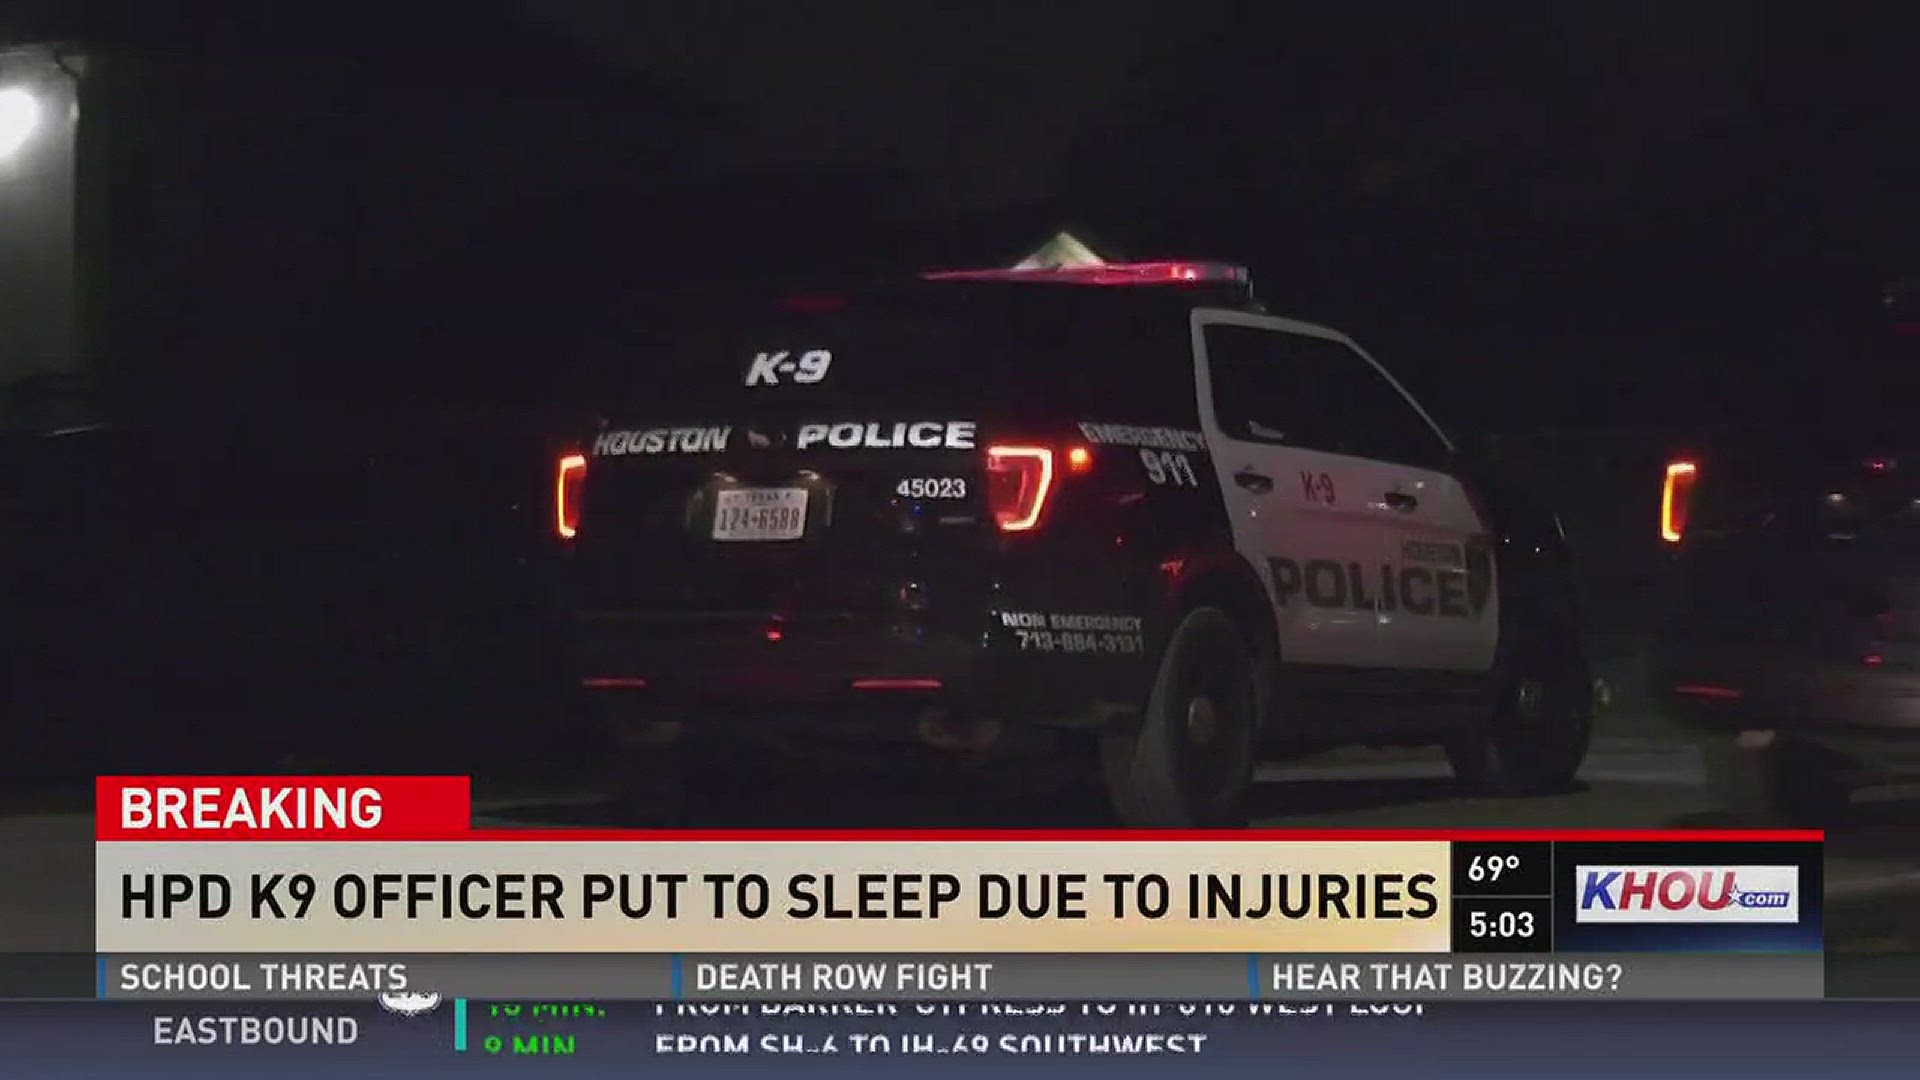 KHOU 11's Janel Forte reports the Houston Police Department is mourning the loss of one of its K9 Officers